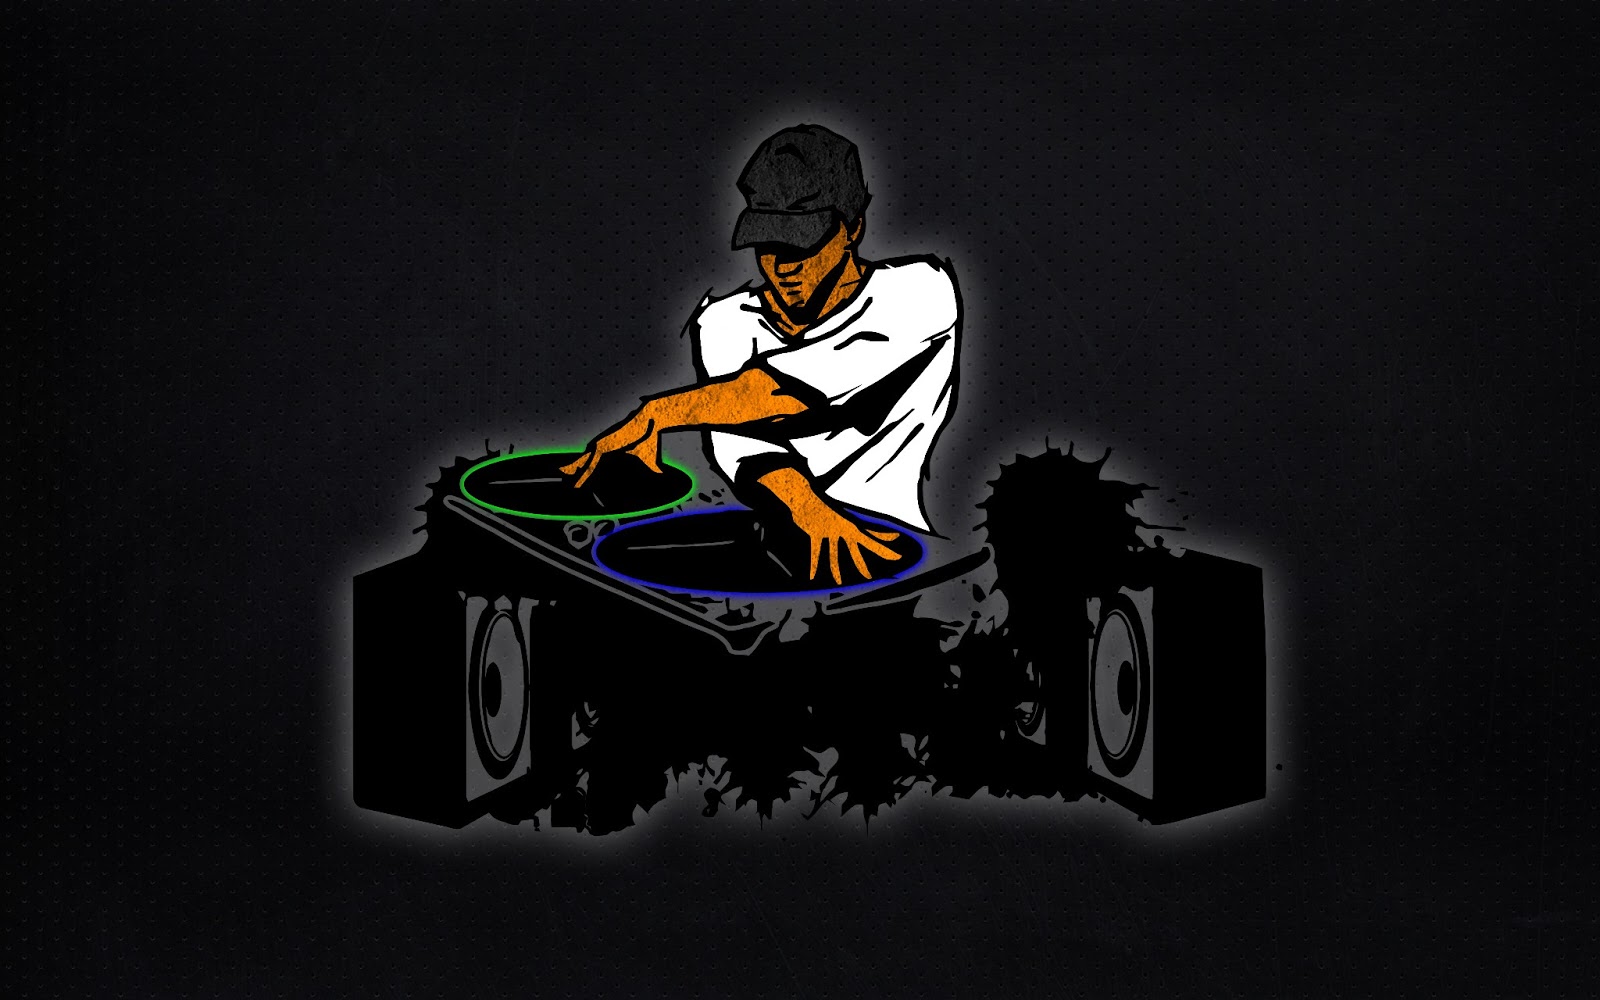 HD Wallpaper Graphic Musical Instruments Sounds Dj Hq